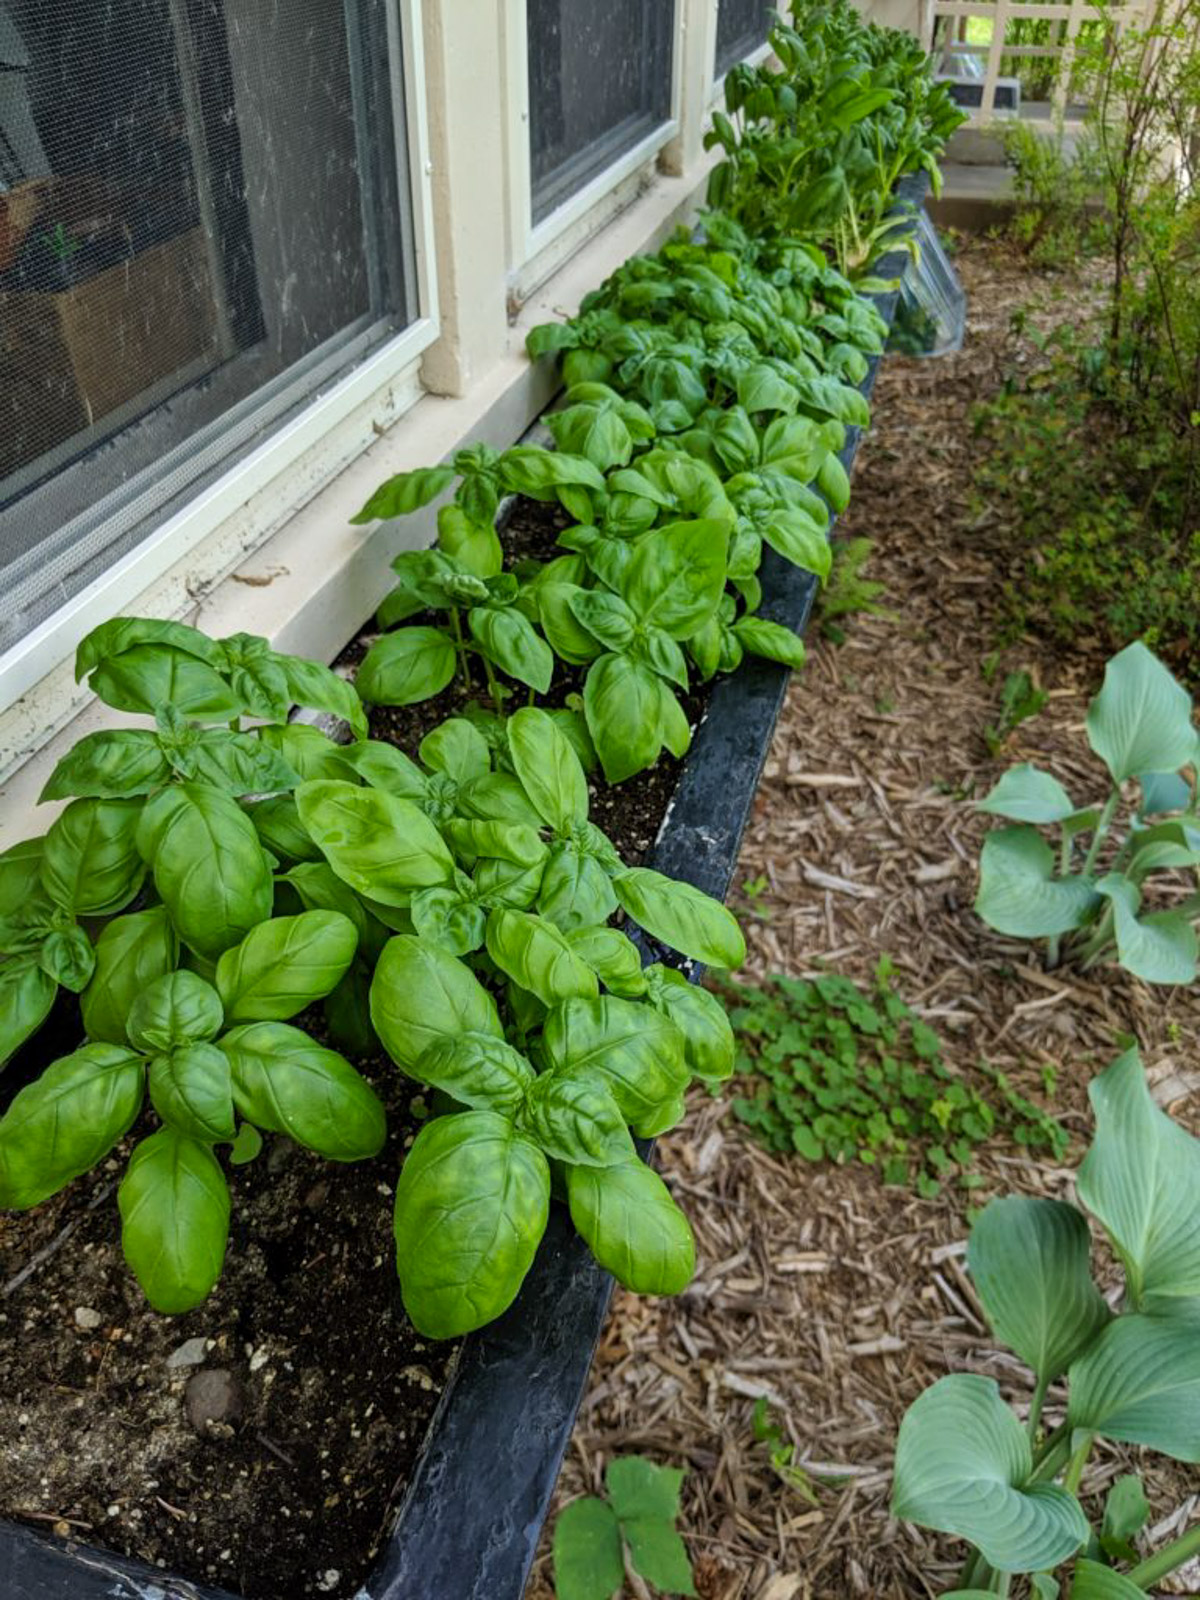 Basil and spinach growing in a window box planter.